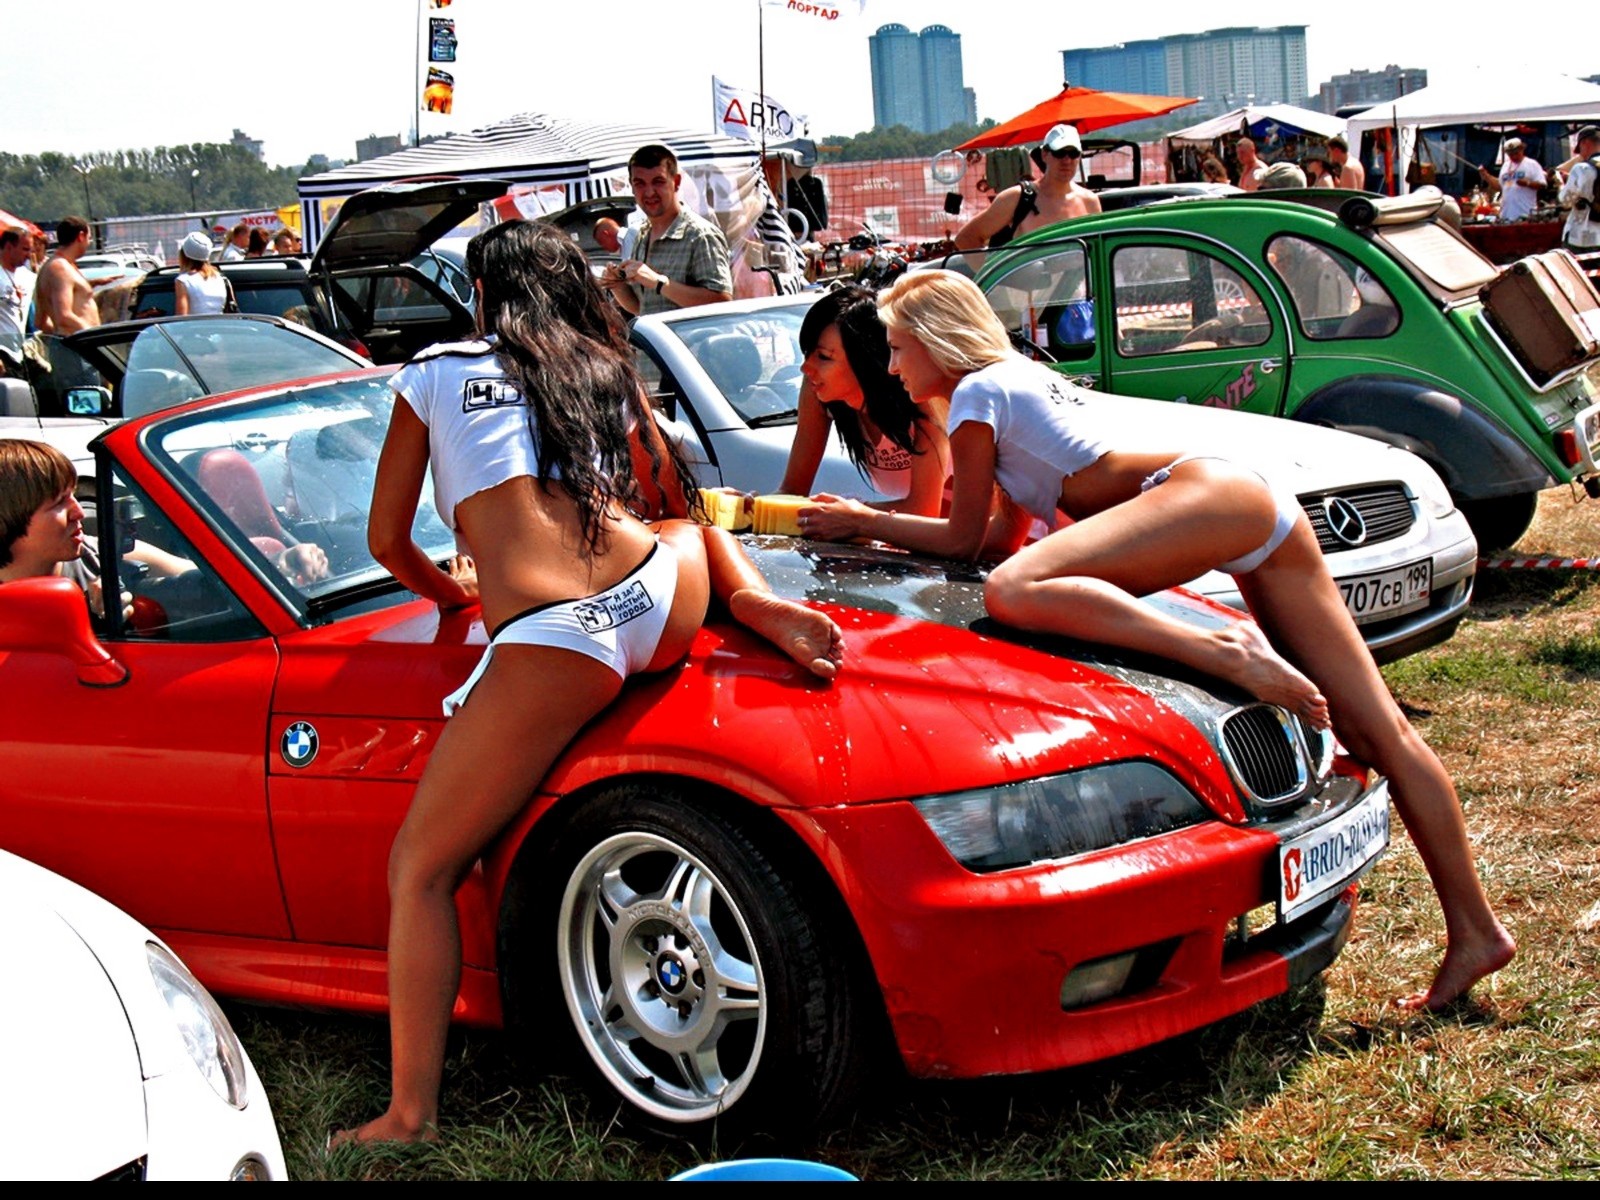 People 1600x1200 car women with cars BMW BMW Z3 ass women trio rear view barefoot red cars vehicle women outdoors people men spread legs legs dark hair blonde car meets car washes women German cars